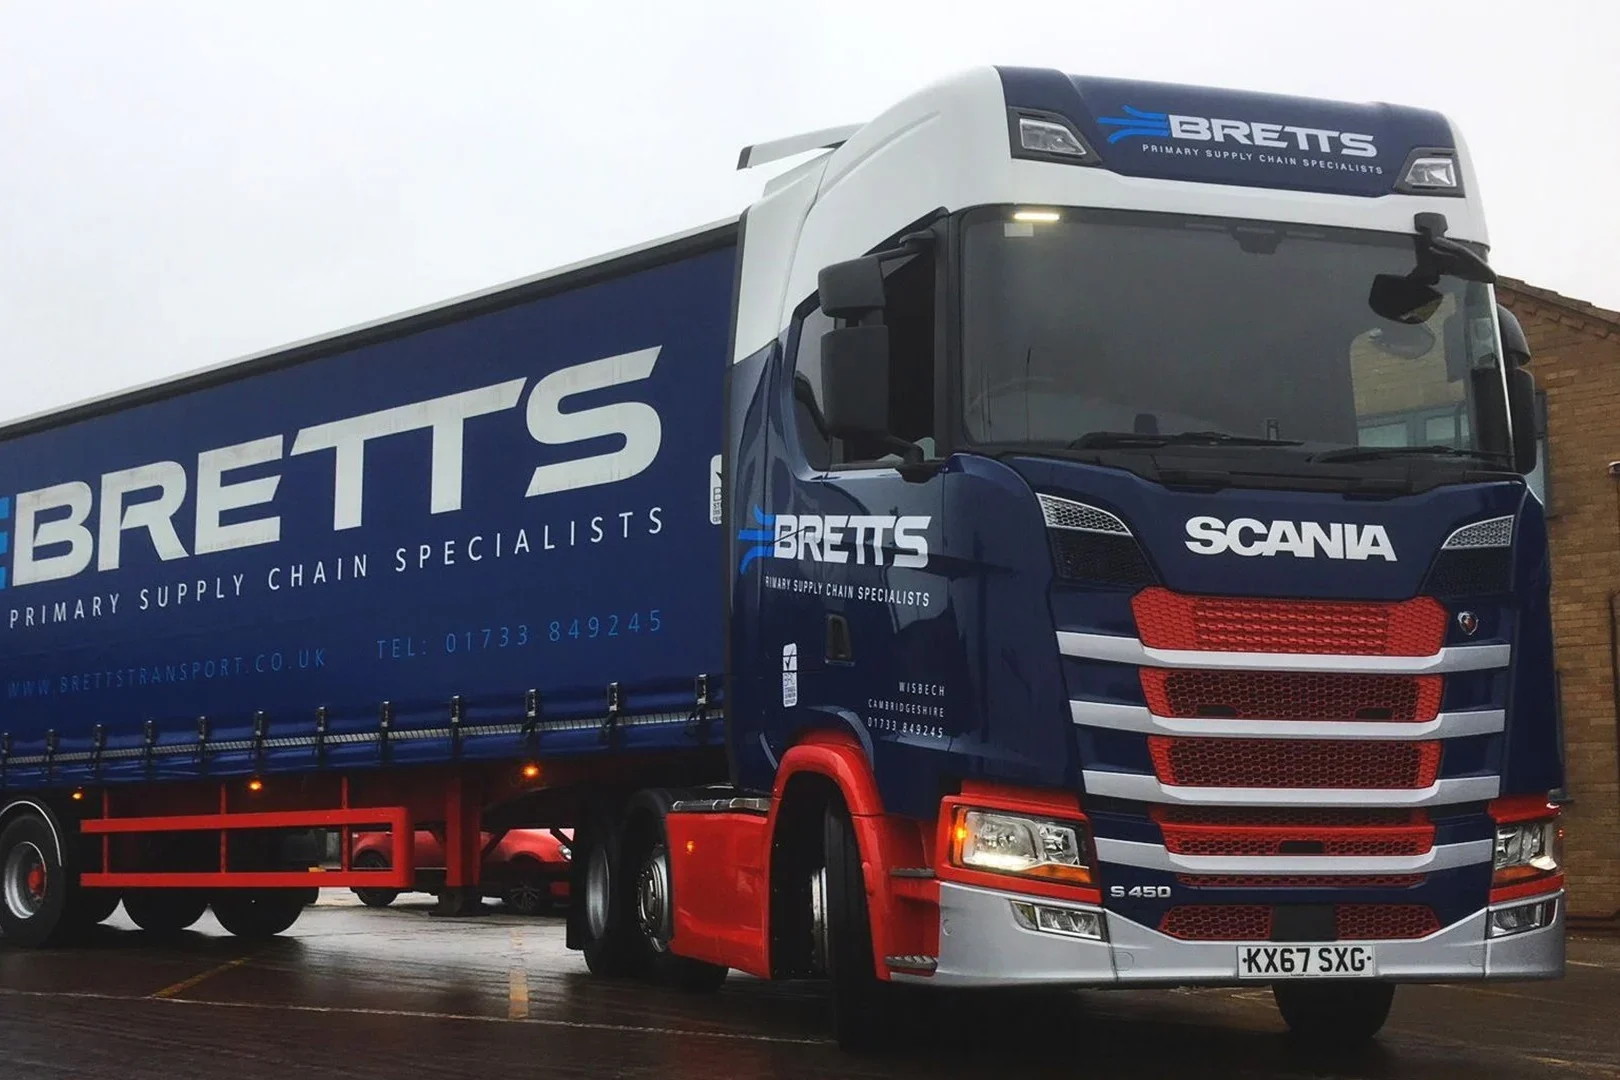 Bretts Transport reduces accidents and saves on administration costs thanks to Samsara dash cams